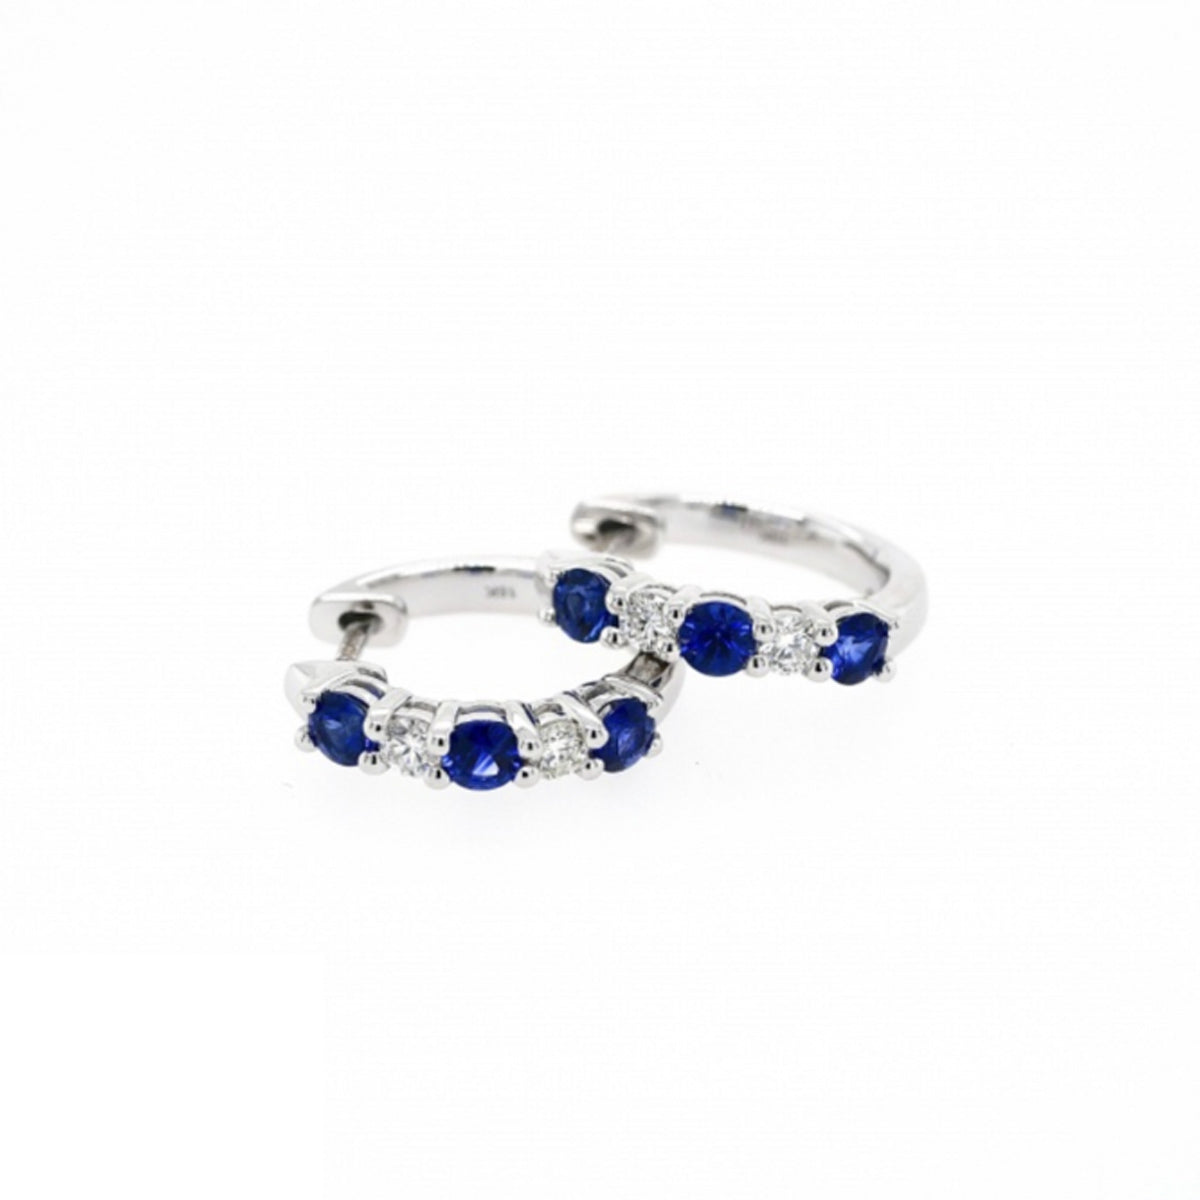 18ct White Gold Sapphire and Diamond Hoop Earrings